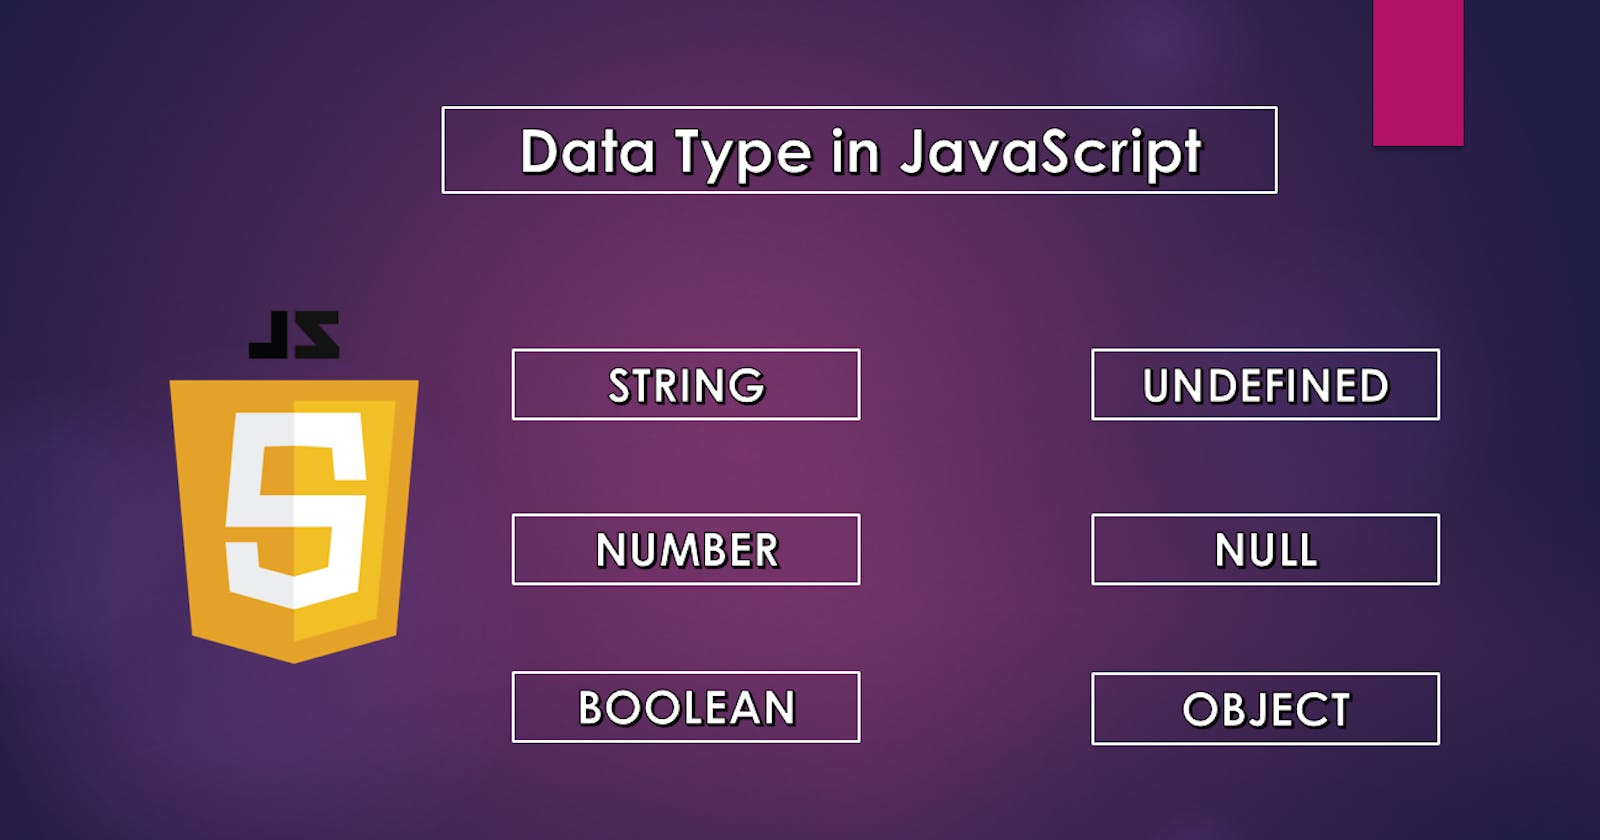 Introduction to the Data Types in JavaScript